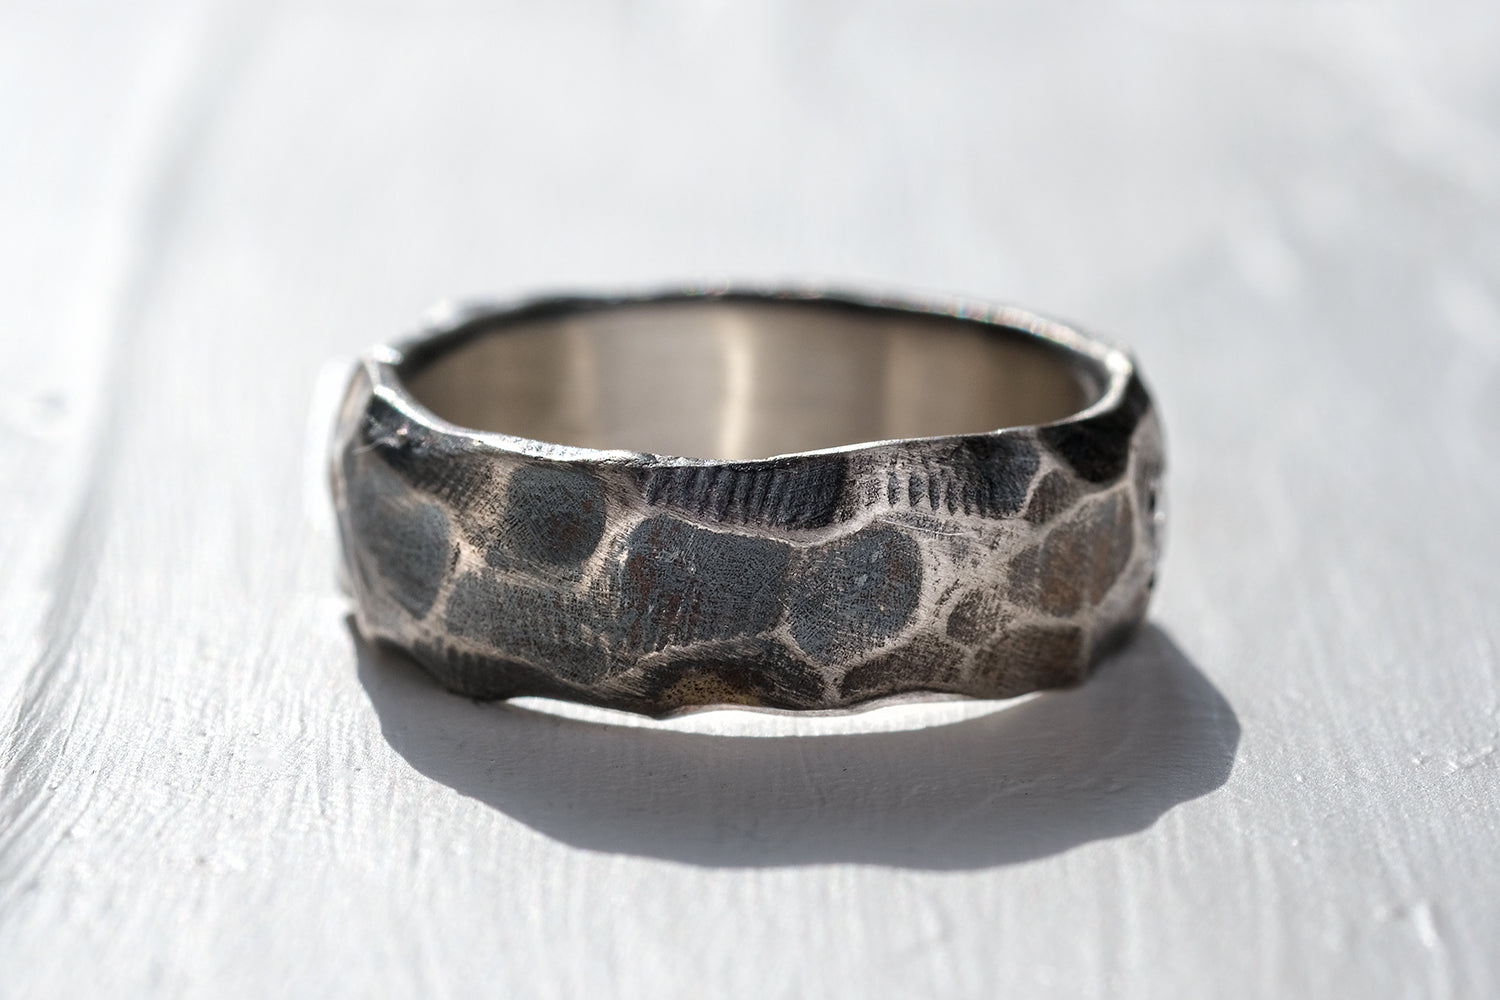 Silver Ring For Men - Roughly Hammered Finish Set With A Diamond